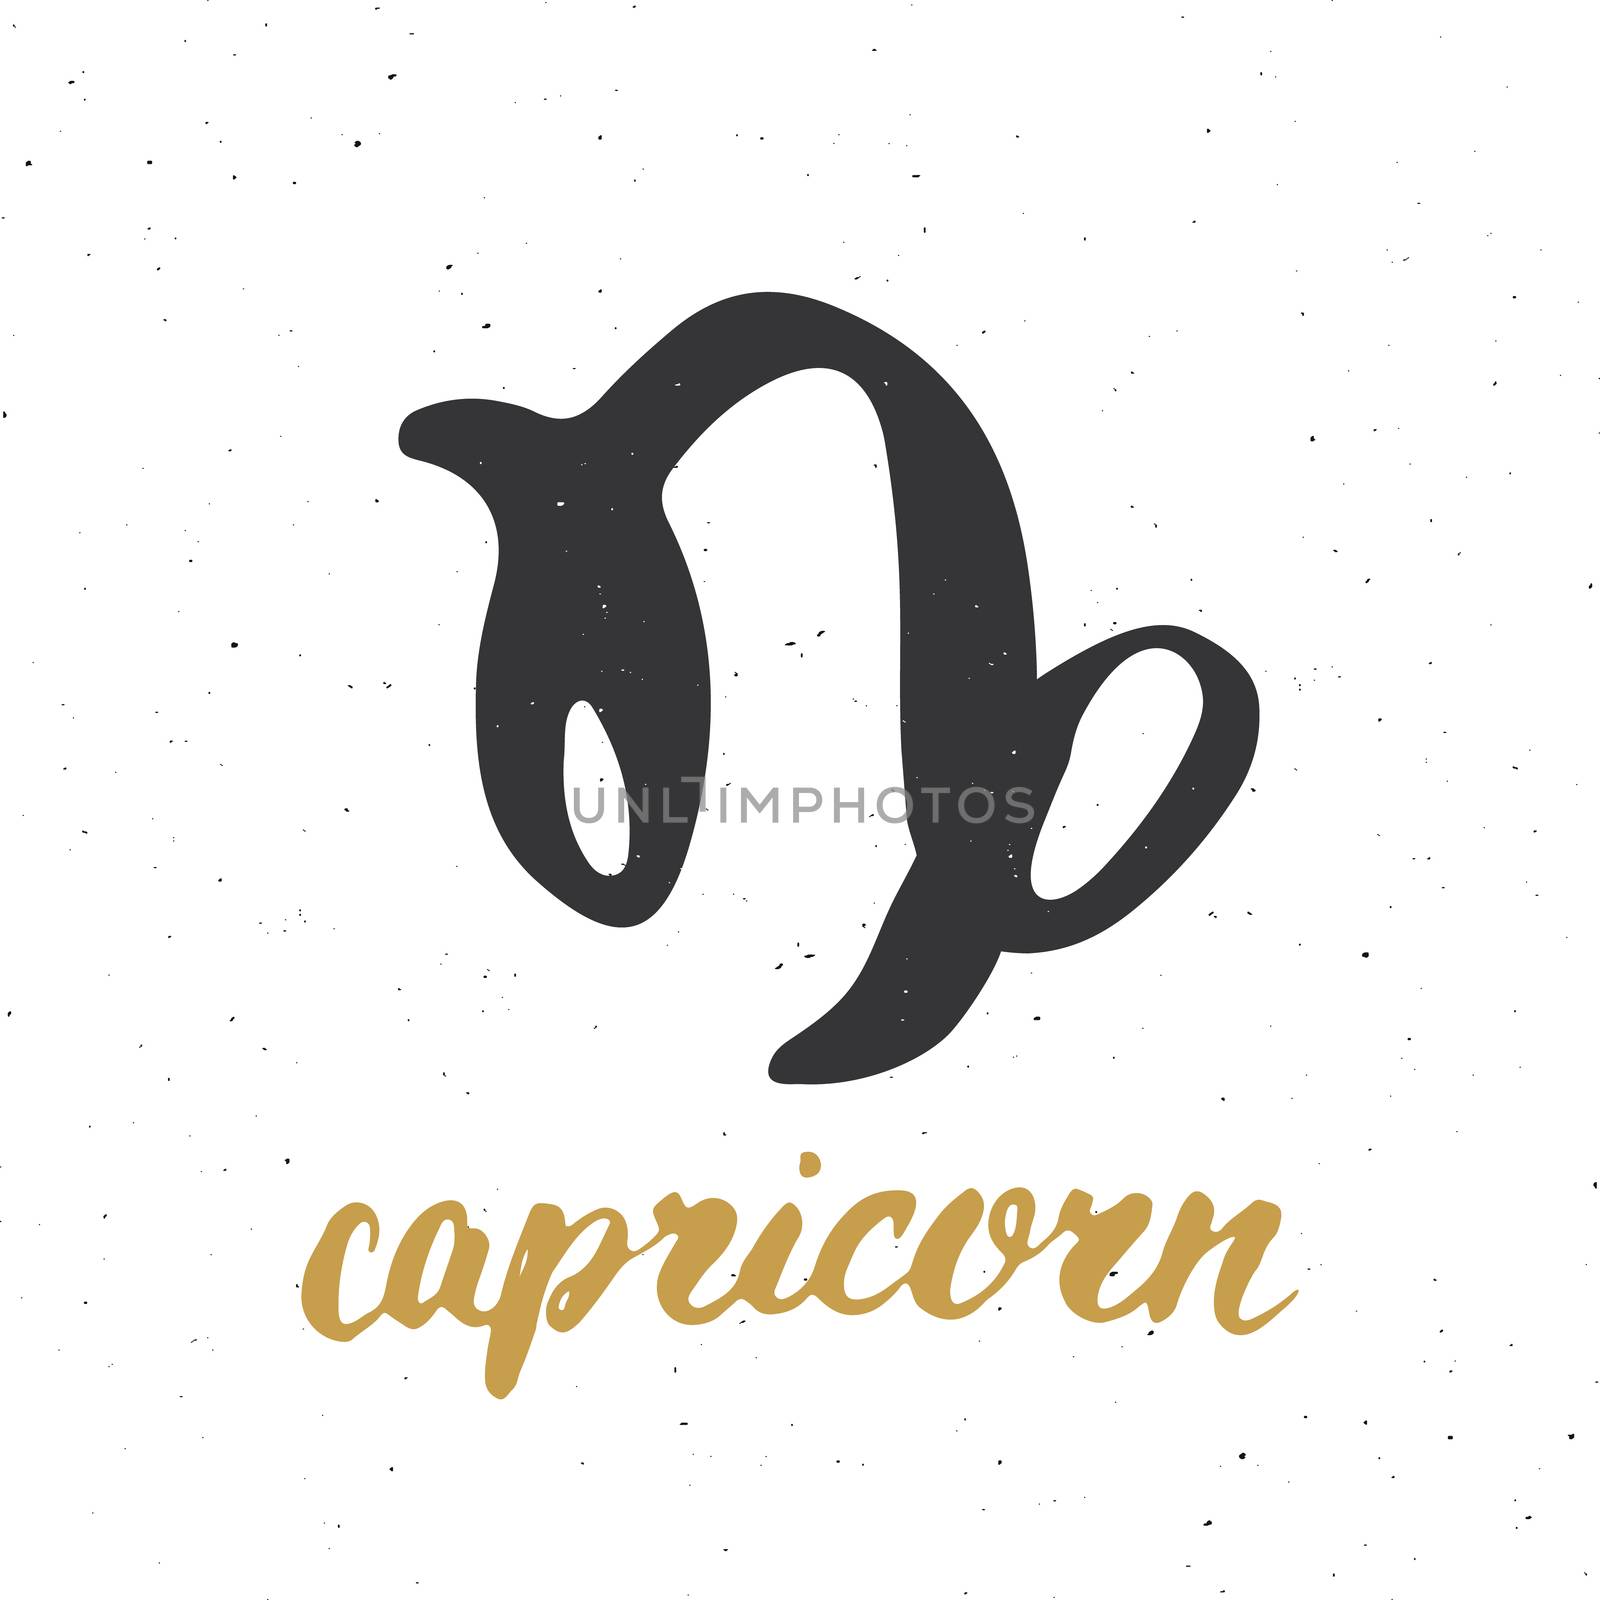 Zodiac sign Capricorn and lettering. Hand drawn horoscope astrology symbol, grunge textured design, typography print, vector illustration .